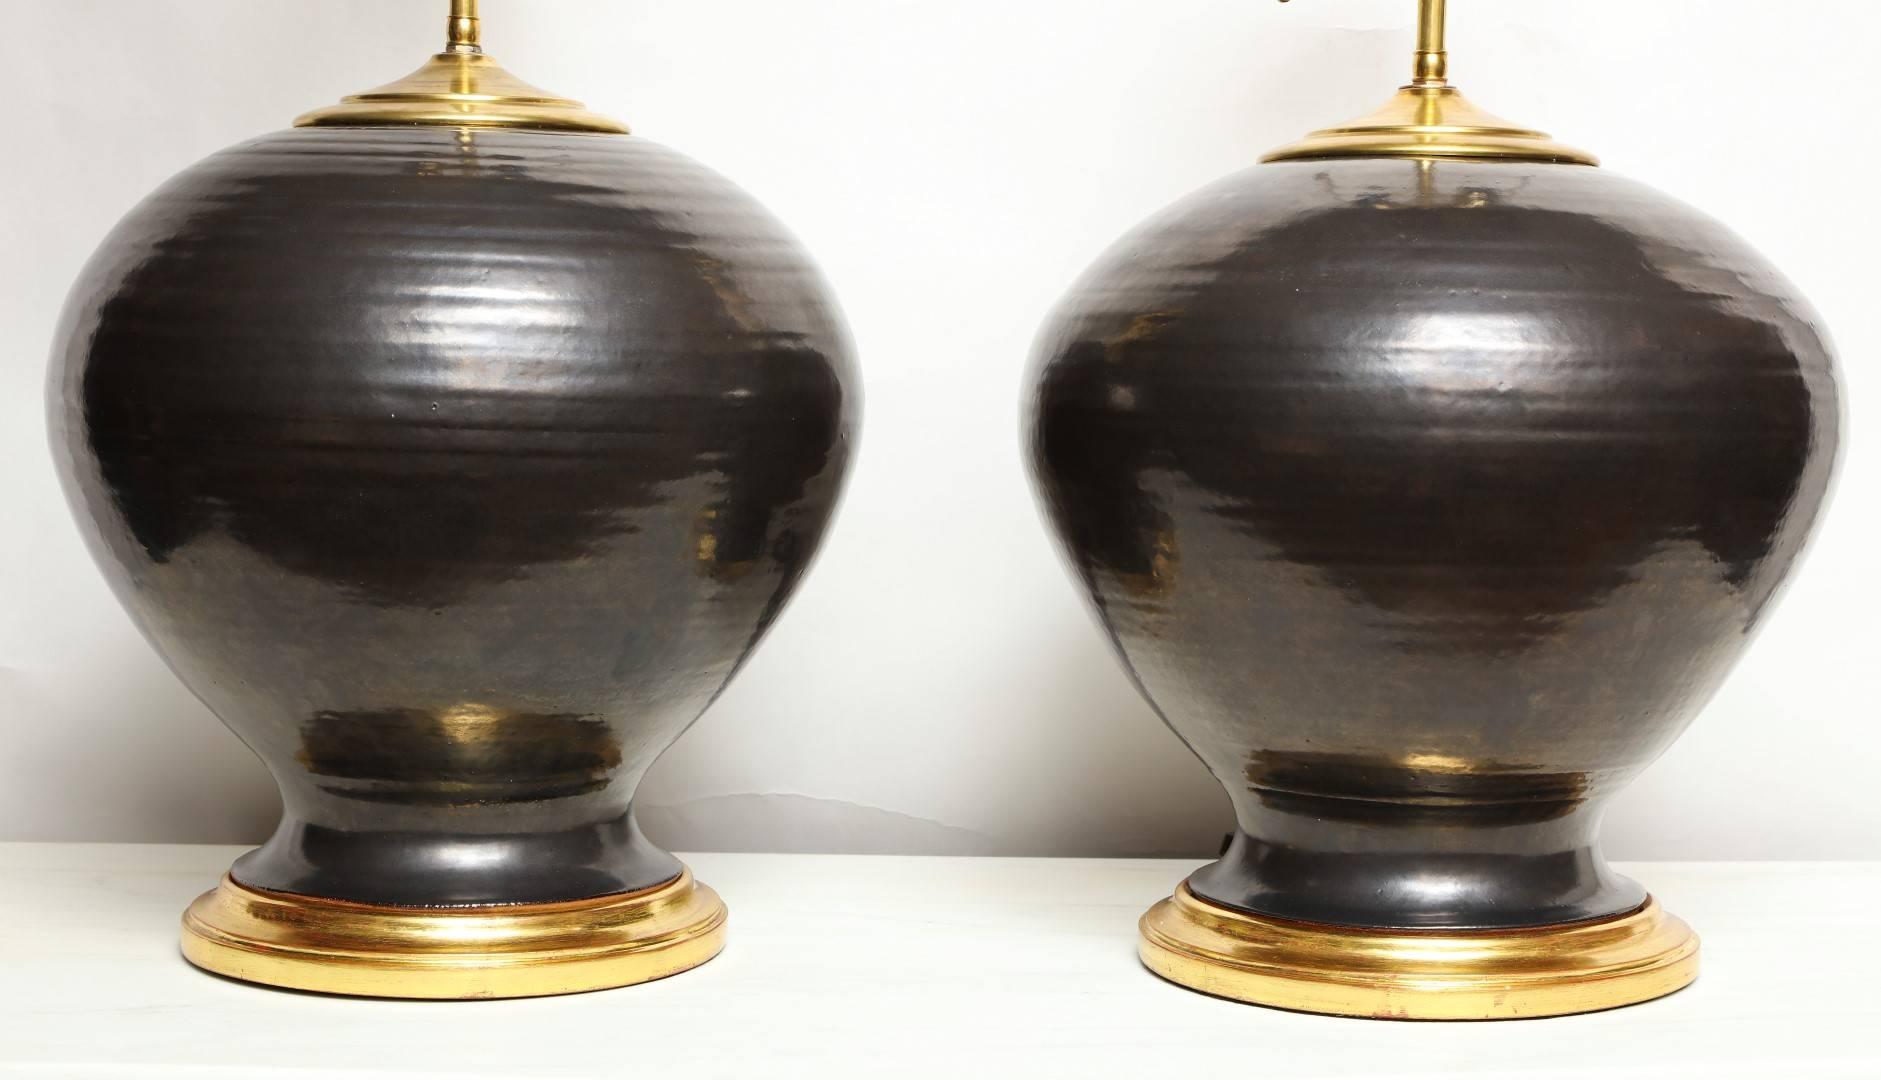 A pair of signed hand-thrown American ceramic studio vases with ribbed texture, the tapered shape with 5